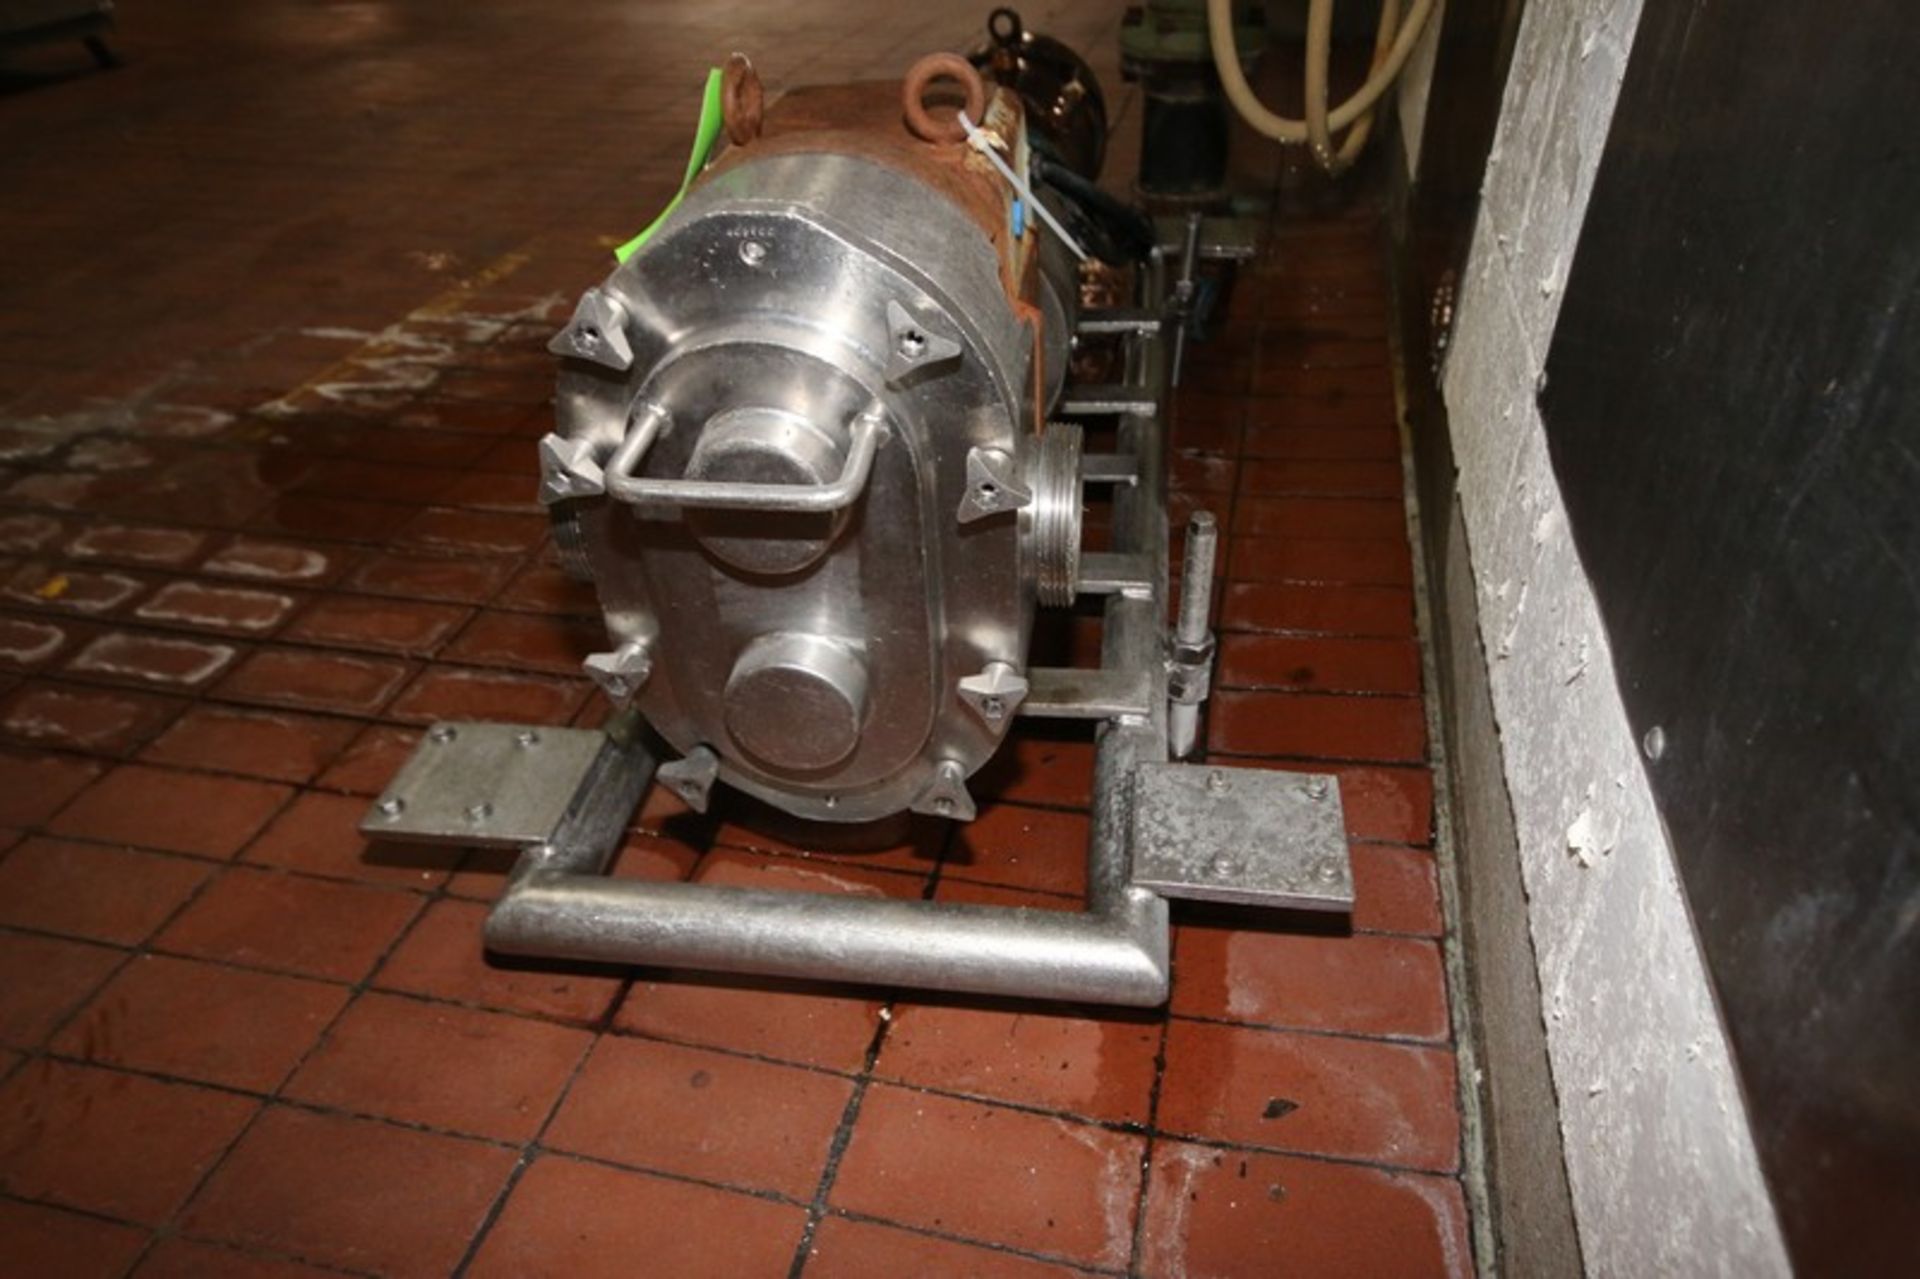 Waukesha Cherry Burrell 7.5 hp Positive Displacement Pump, M/N 220, S/N 425355-06, with Reliance - Image 3 of 6